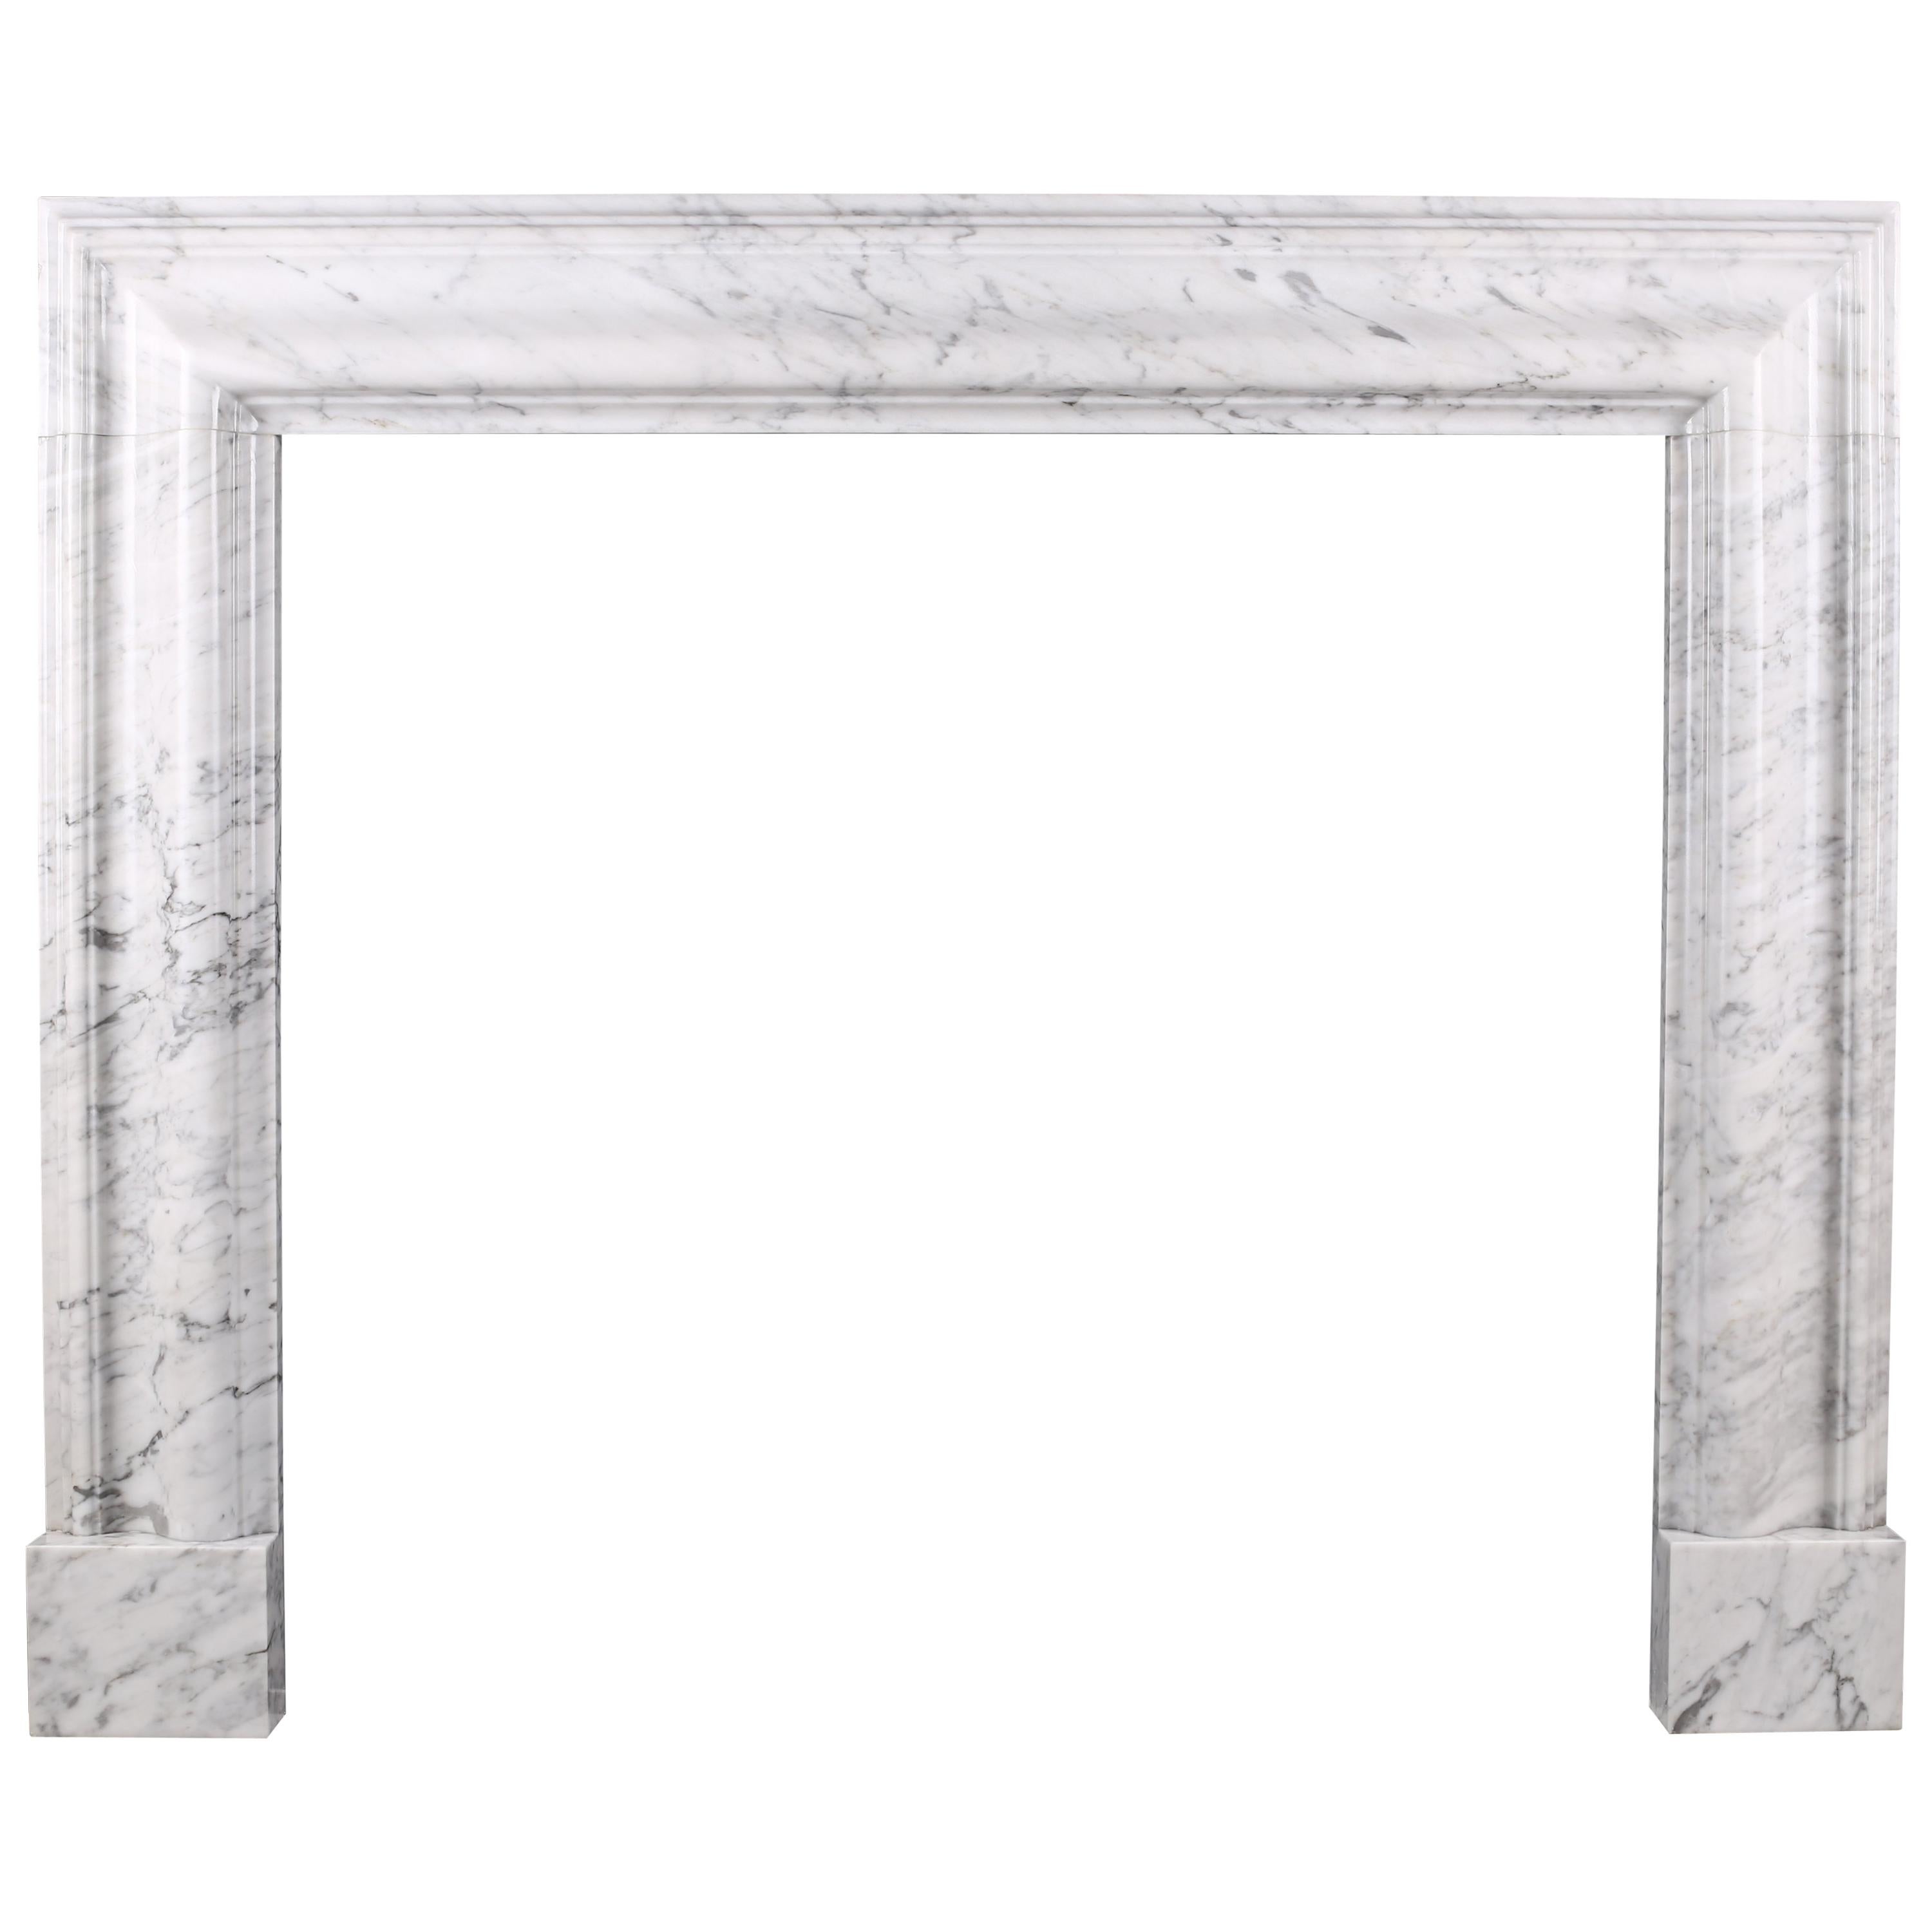 Bolection Fireplace in Italian White Carrara Marble For Sale